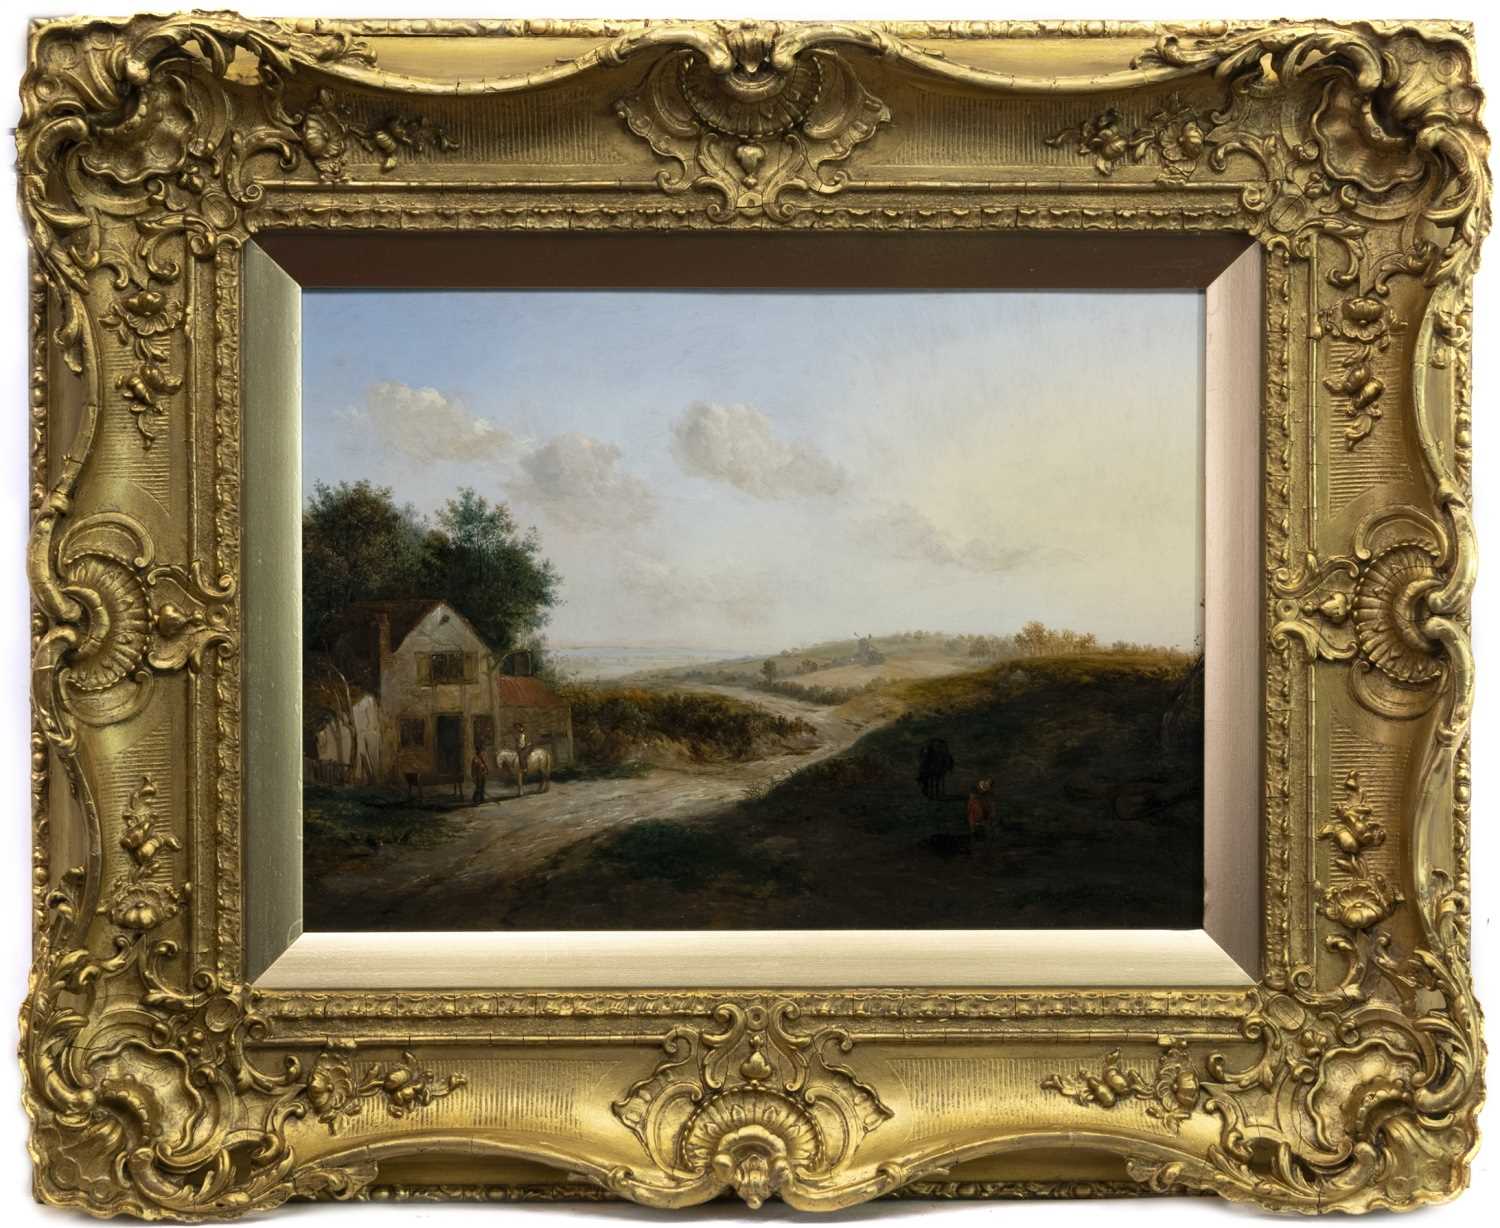 Lot 57 - COUNTRY COTTAGE AND FIGURES BY A RIVER, AN OIL BY ALEXANDER NASMYTH